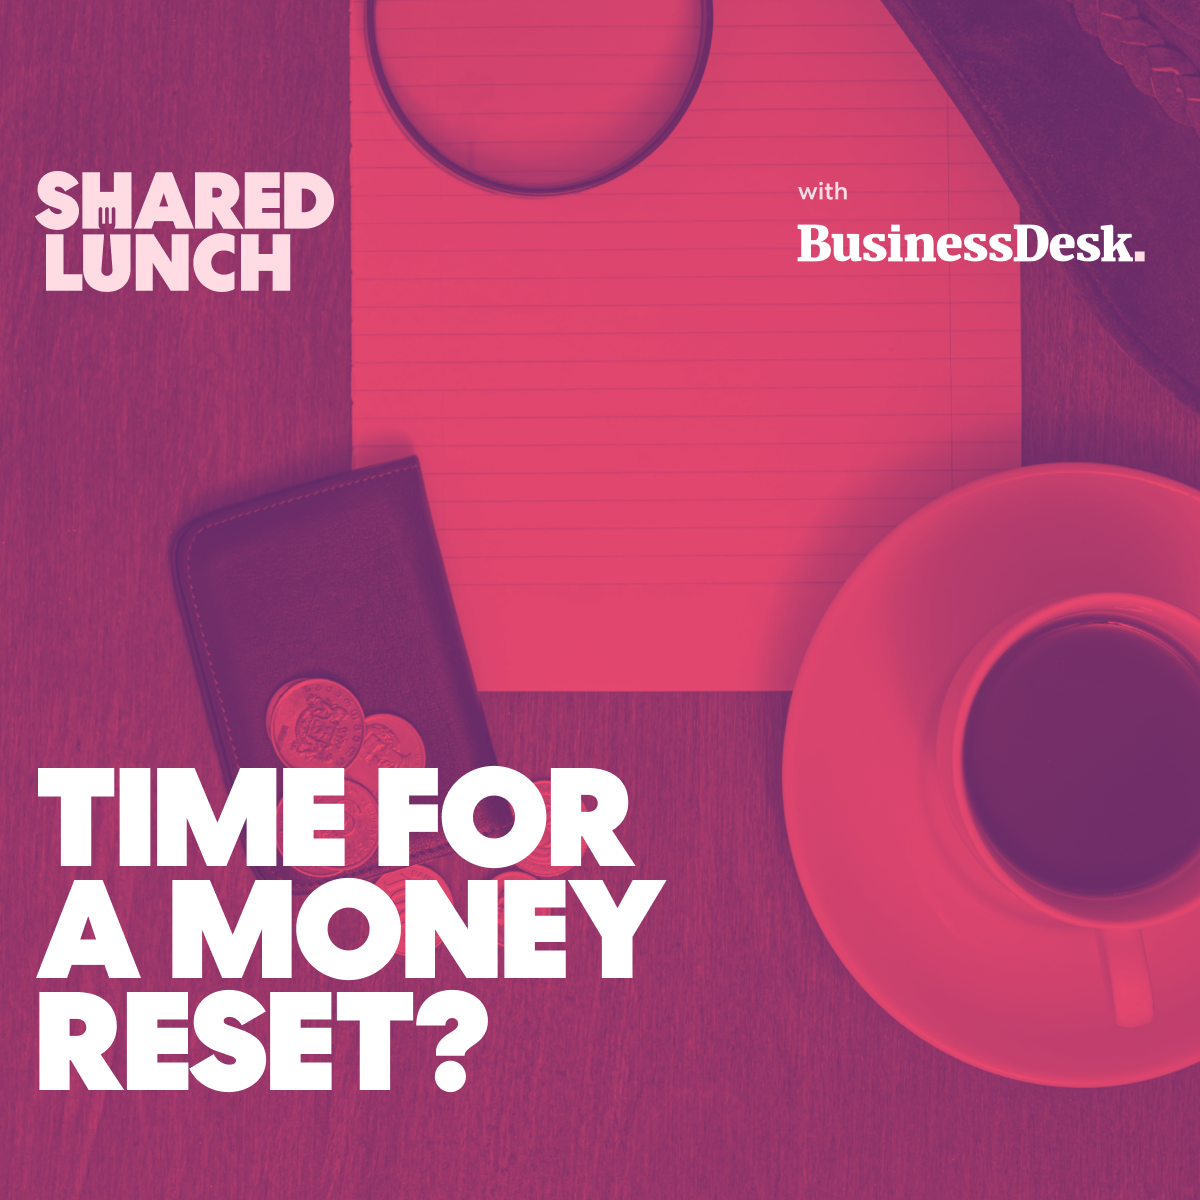 Time for a money reset?